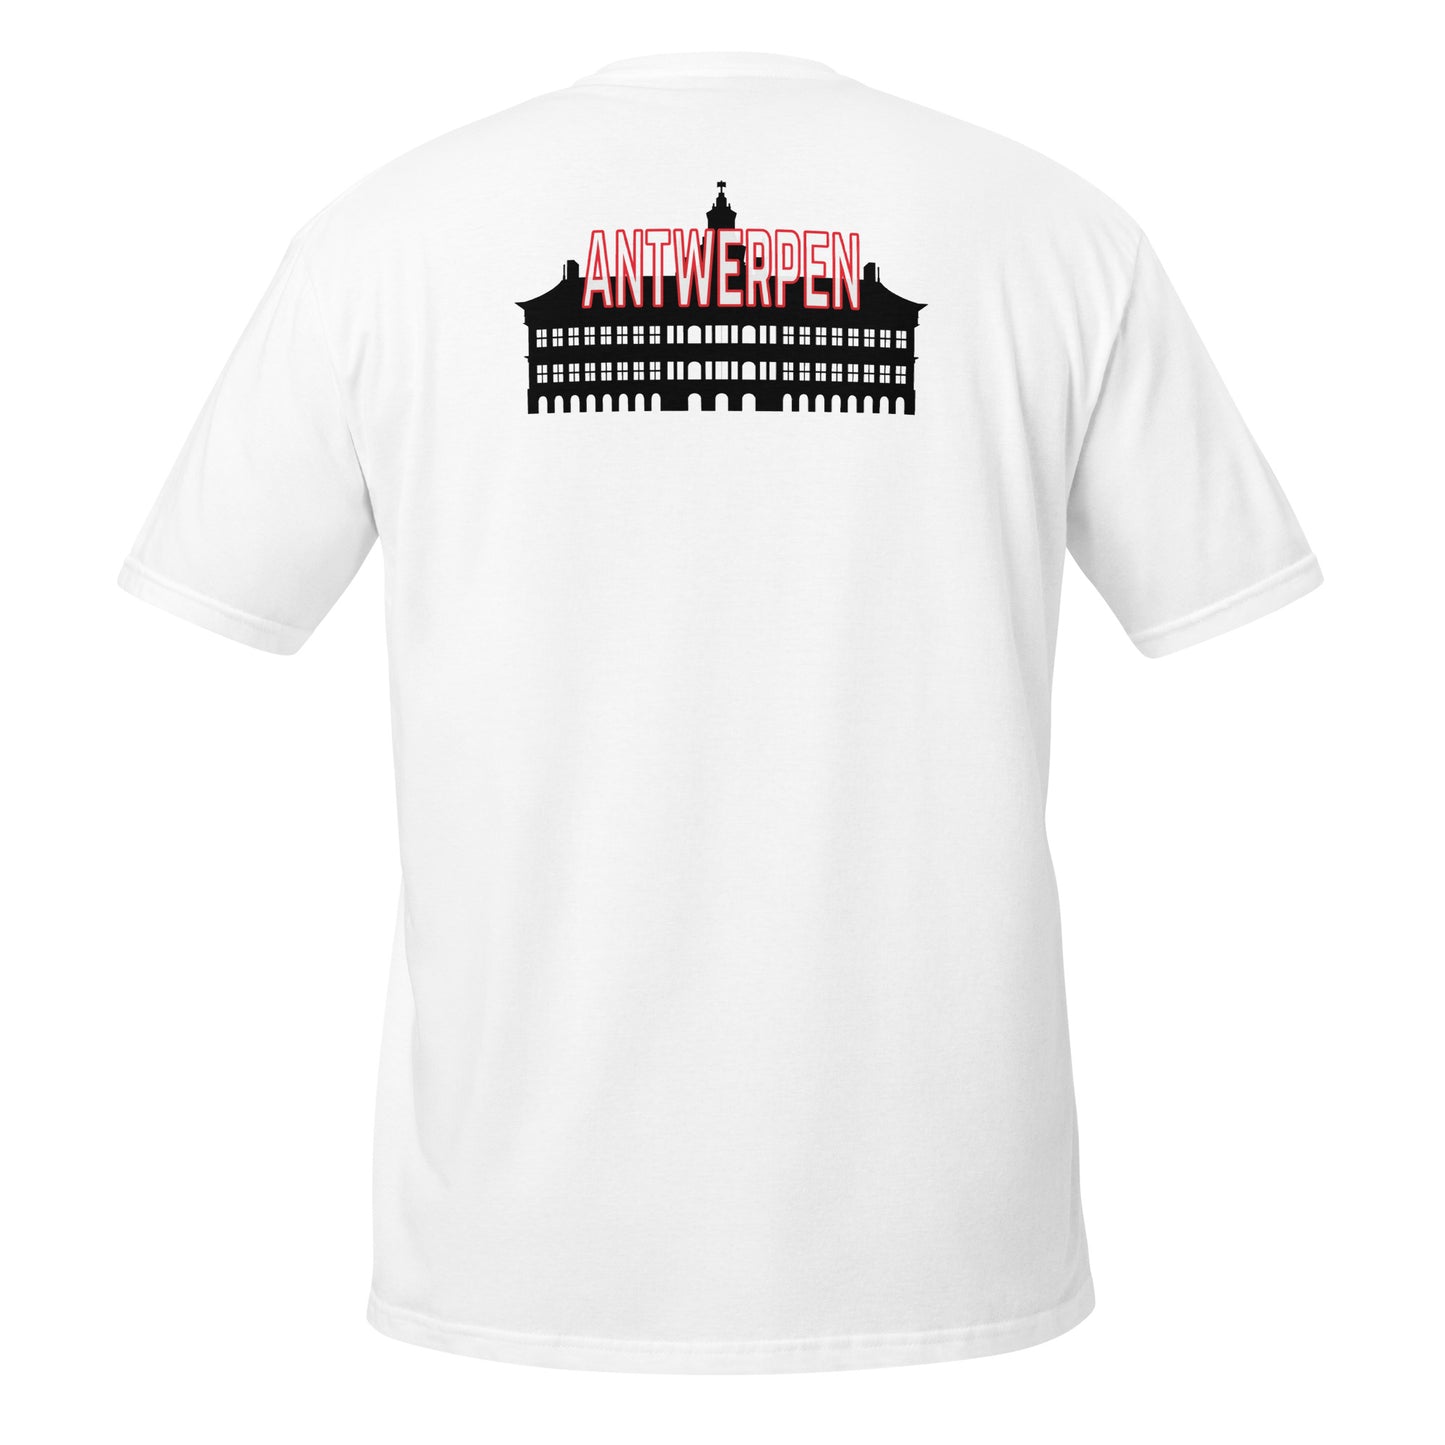 Unique Antwerp T-Shirt Printed With City Hall Of Antwerp